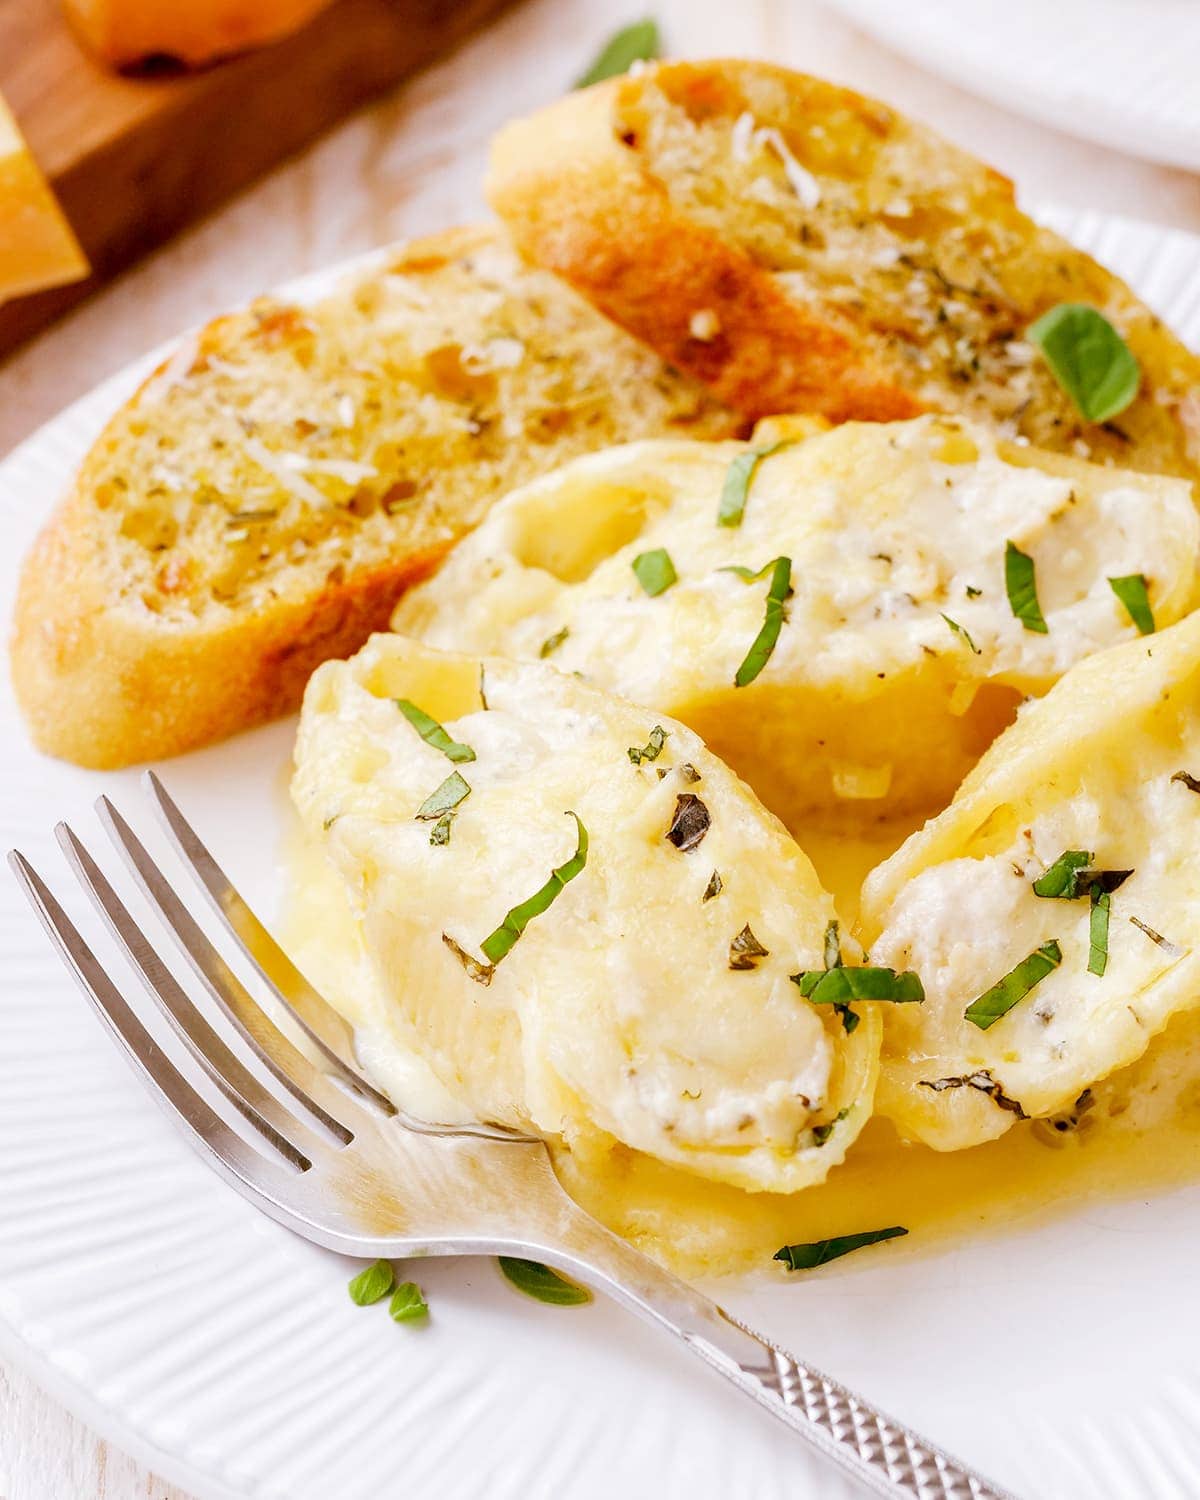 A plate of alfredo stuffed shells and garlic bread pieces.